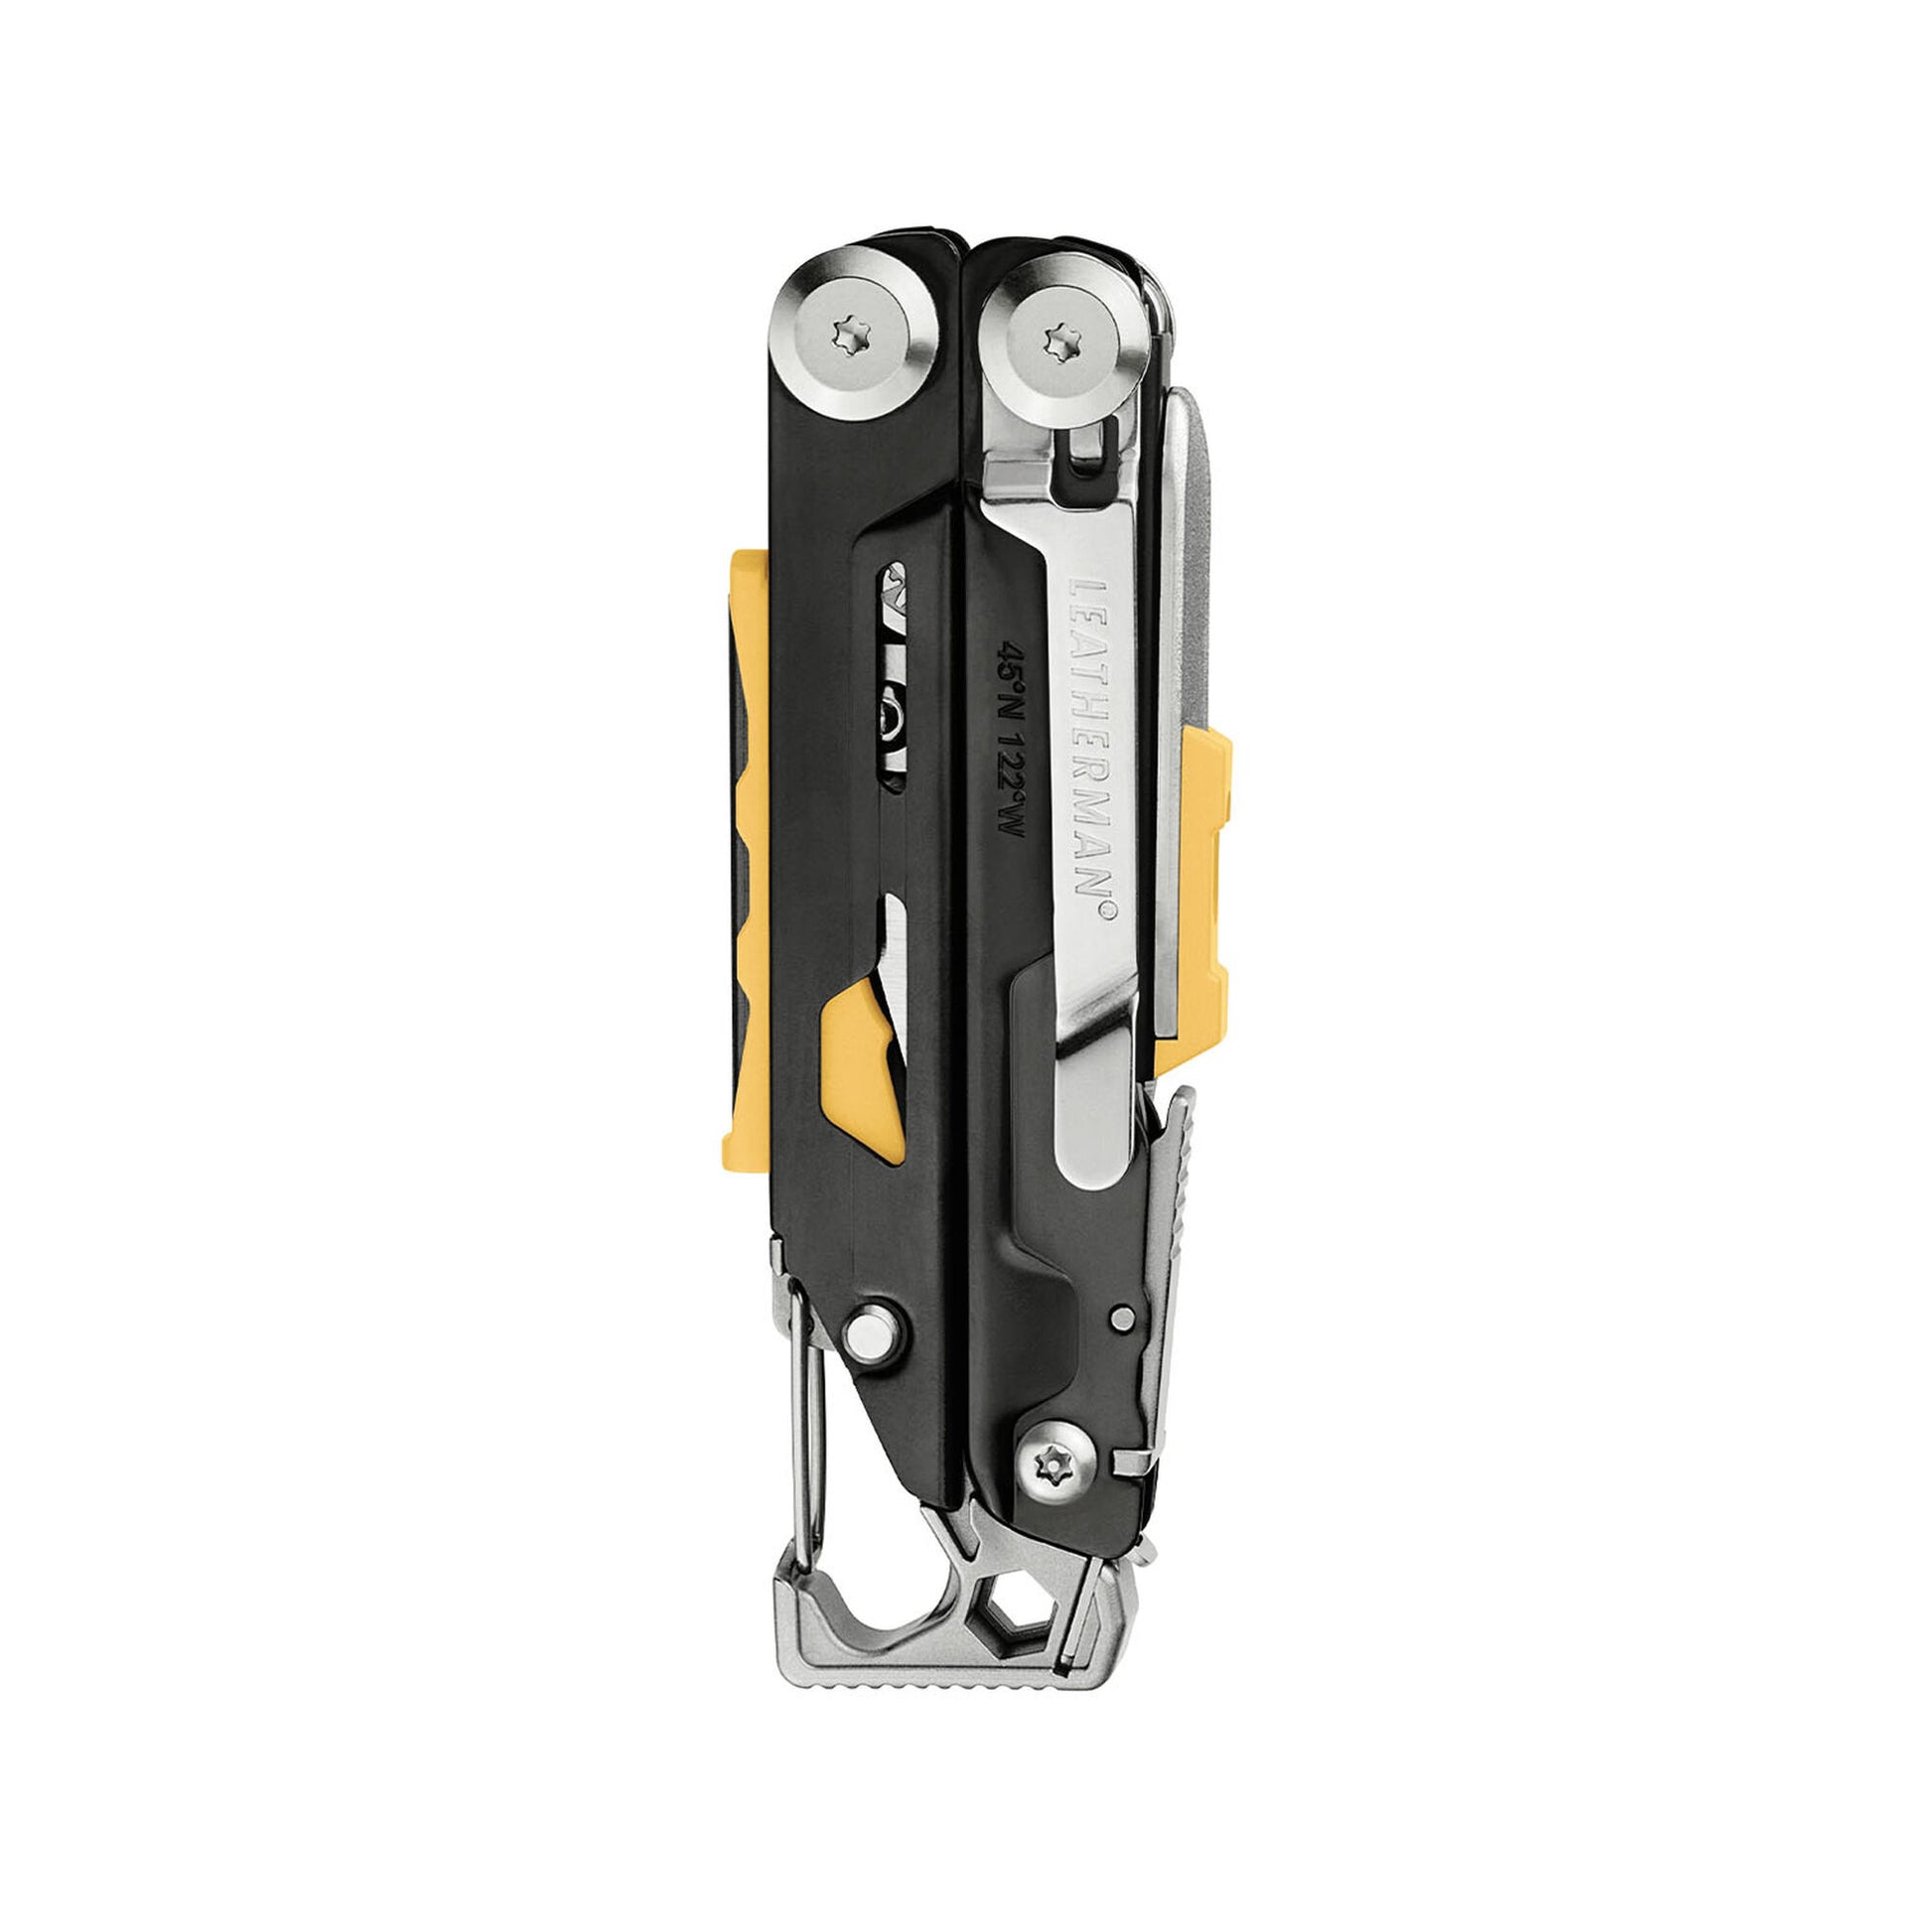 Pince Leatherman Signal - Pince multifonctions (19 outils) - Leatherman-T.A DEFENSE